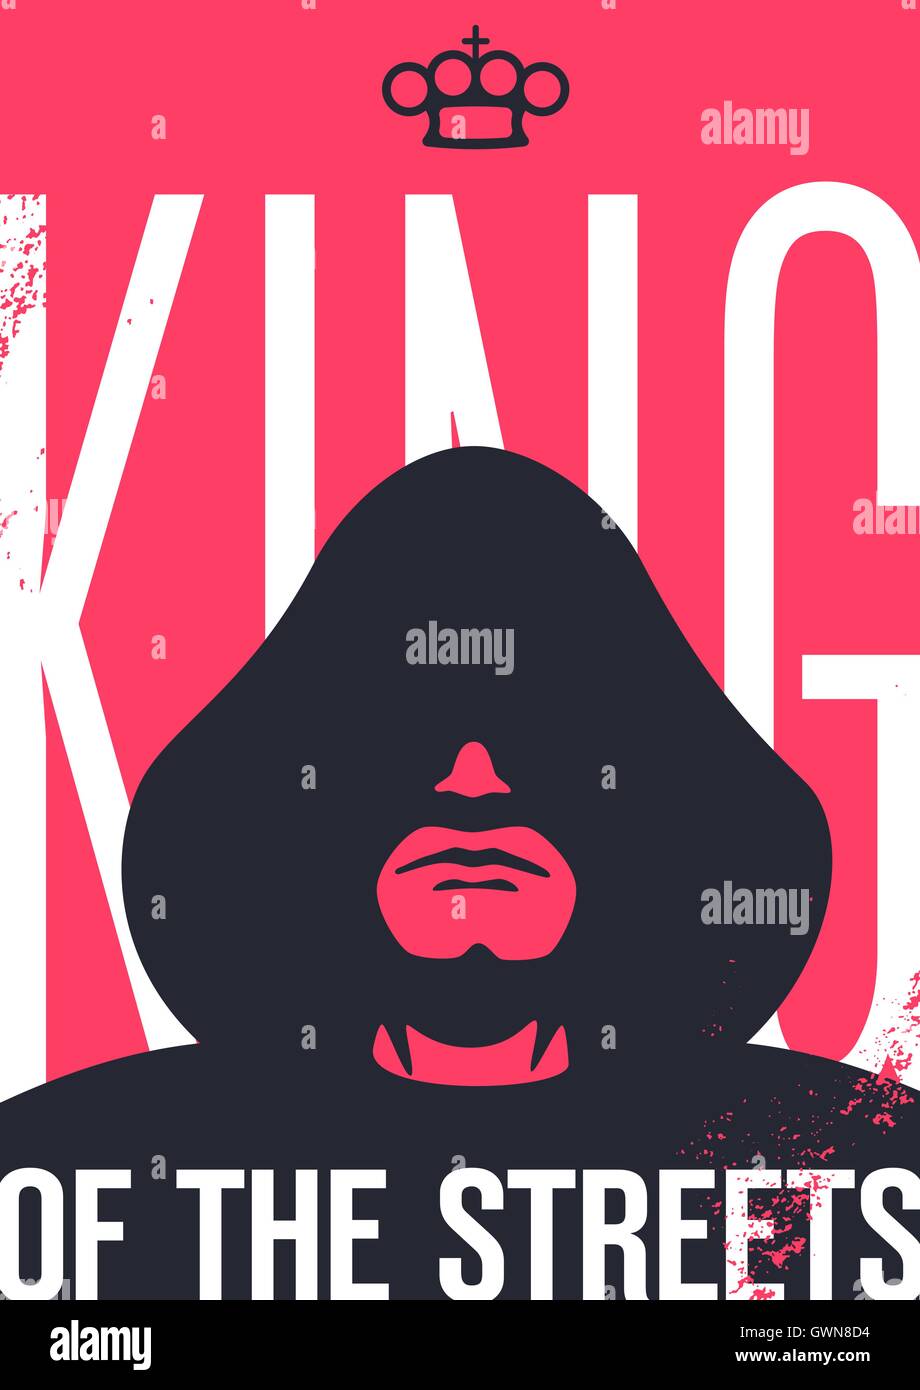 King of the streets. Man in the hood with shadowed face. Crown is in shape of brass knuckles. Grunge style poster. Stock Vector